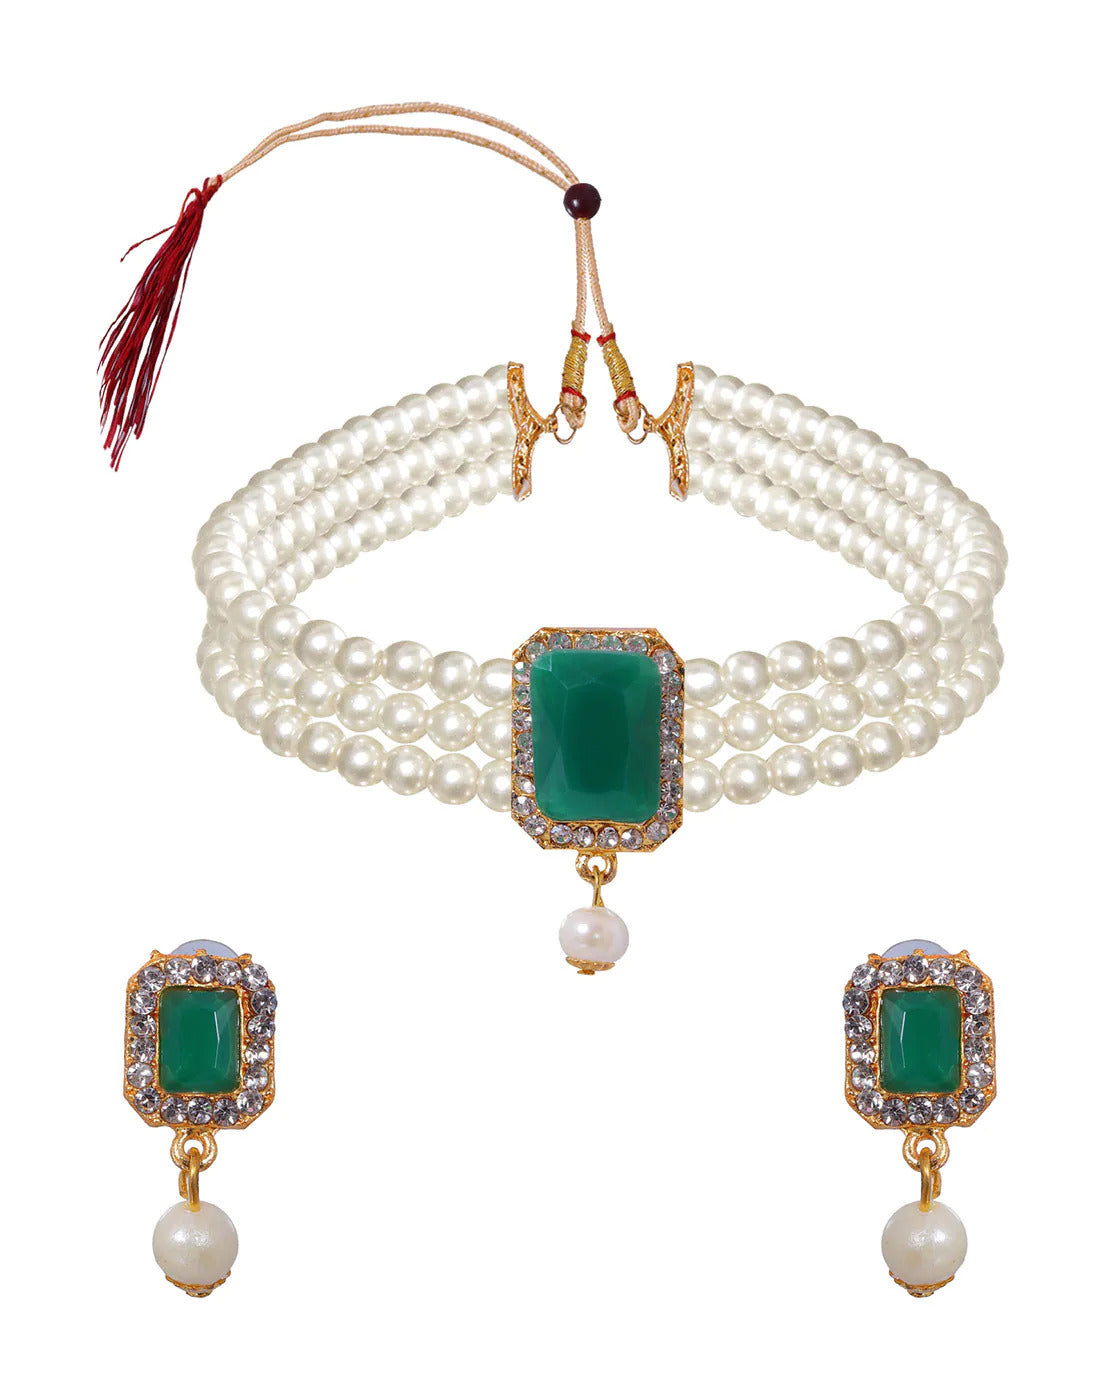 Women's Attractive White Pearls With Green Stone Choker  - Zaffre Collections